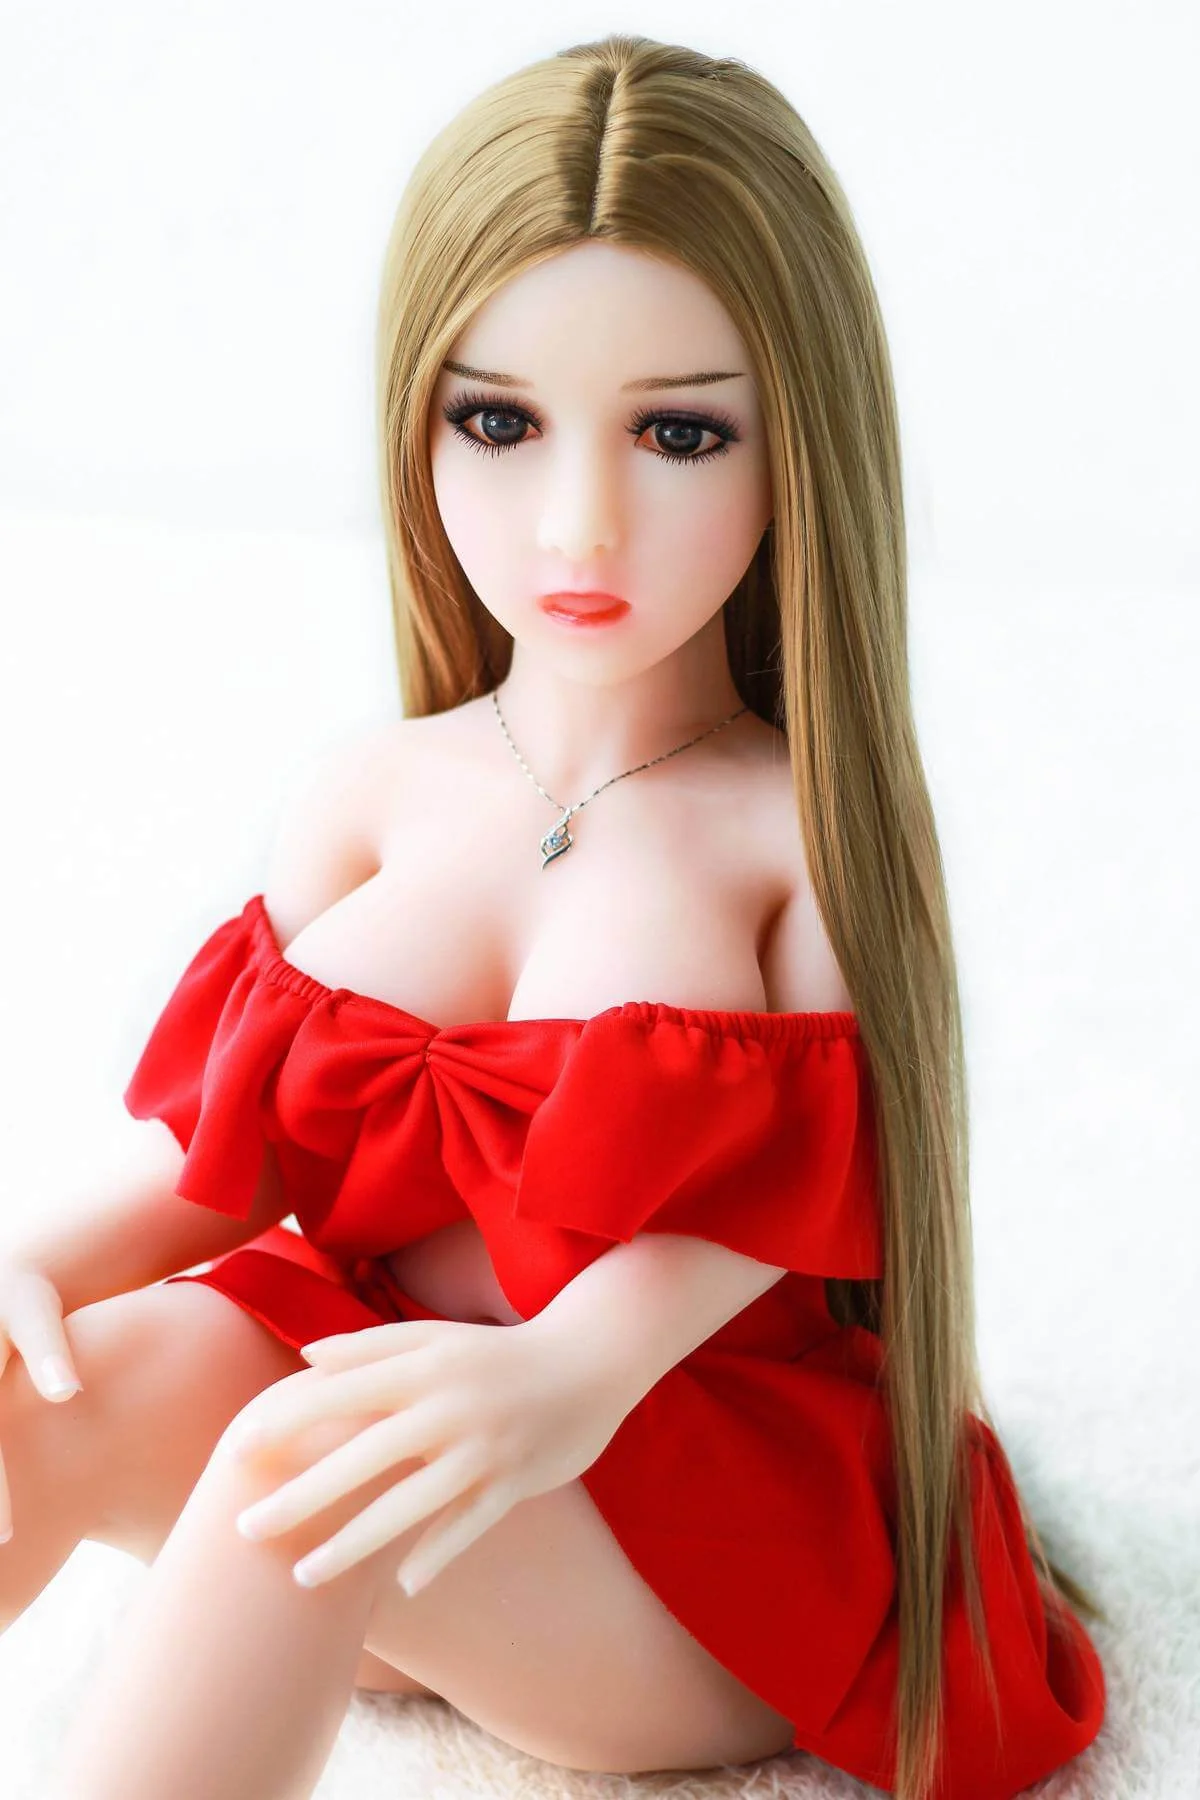 100cm Love Doll - Best Mini Adult Doll on Sale - $399 Today